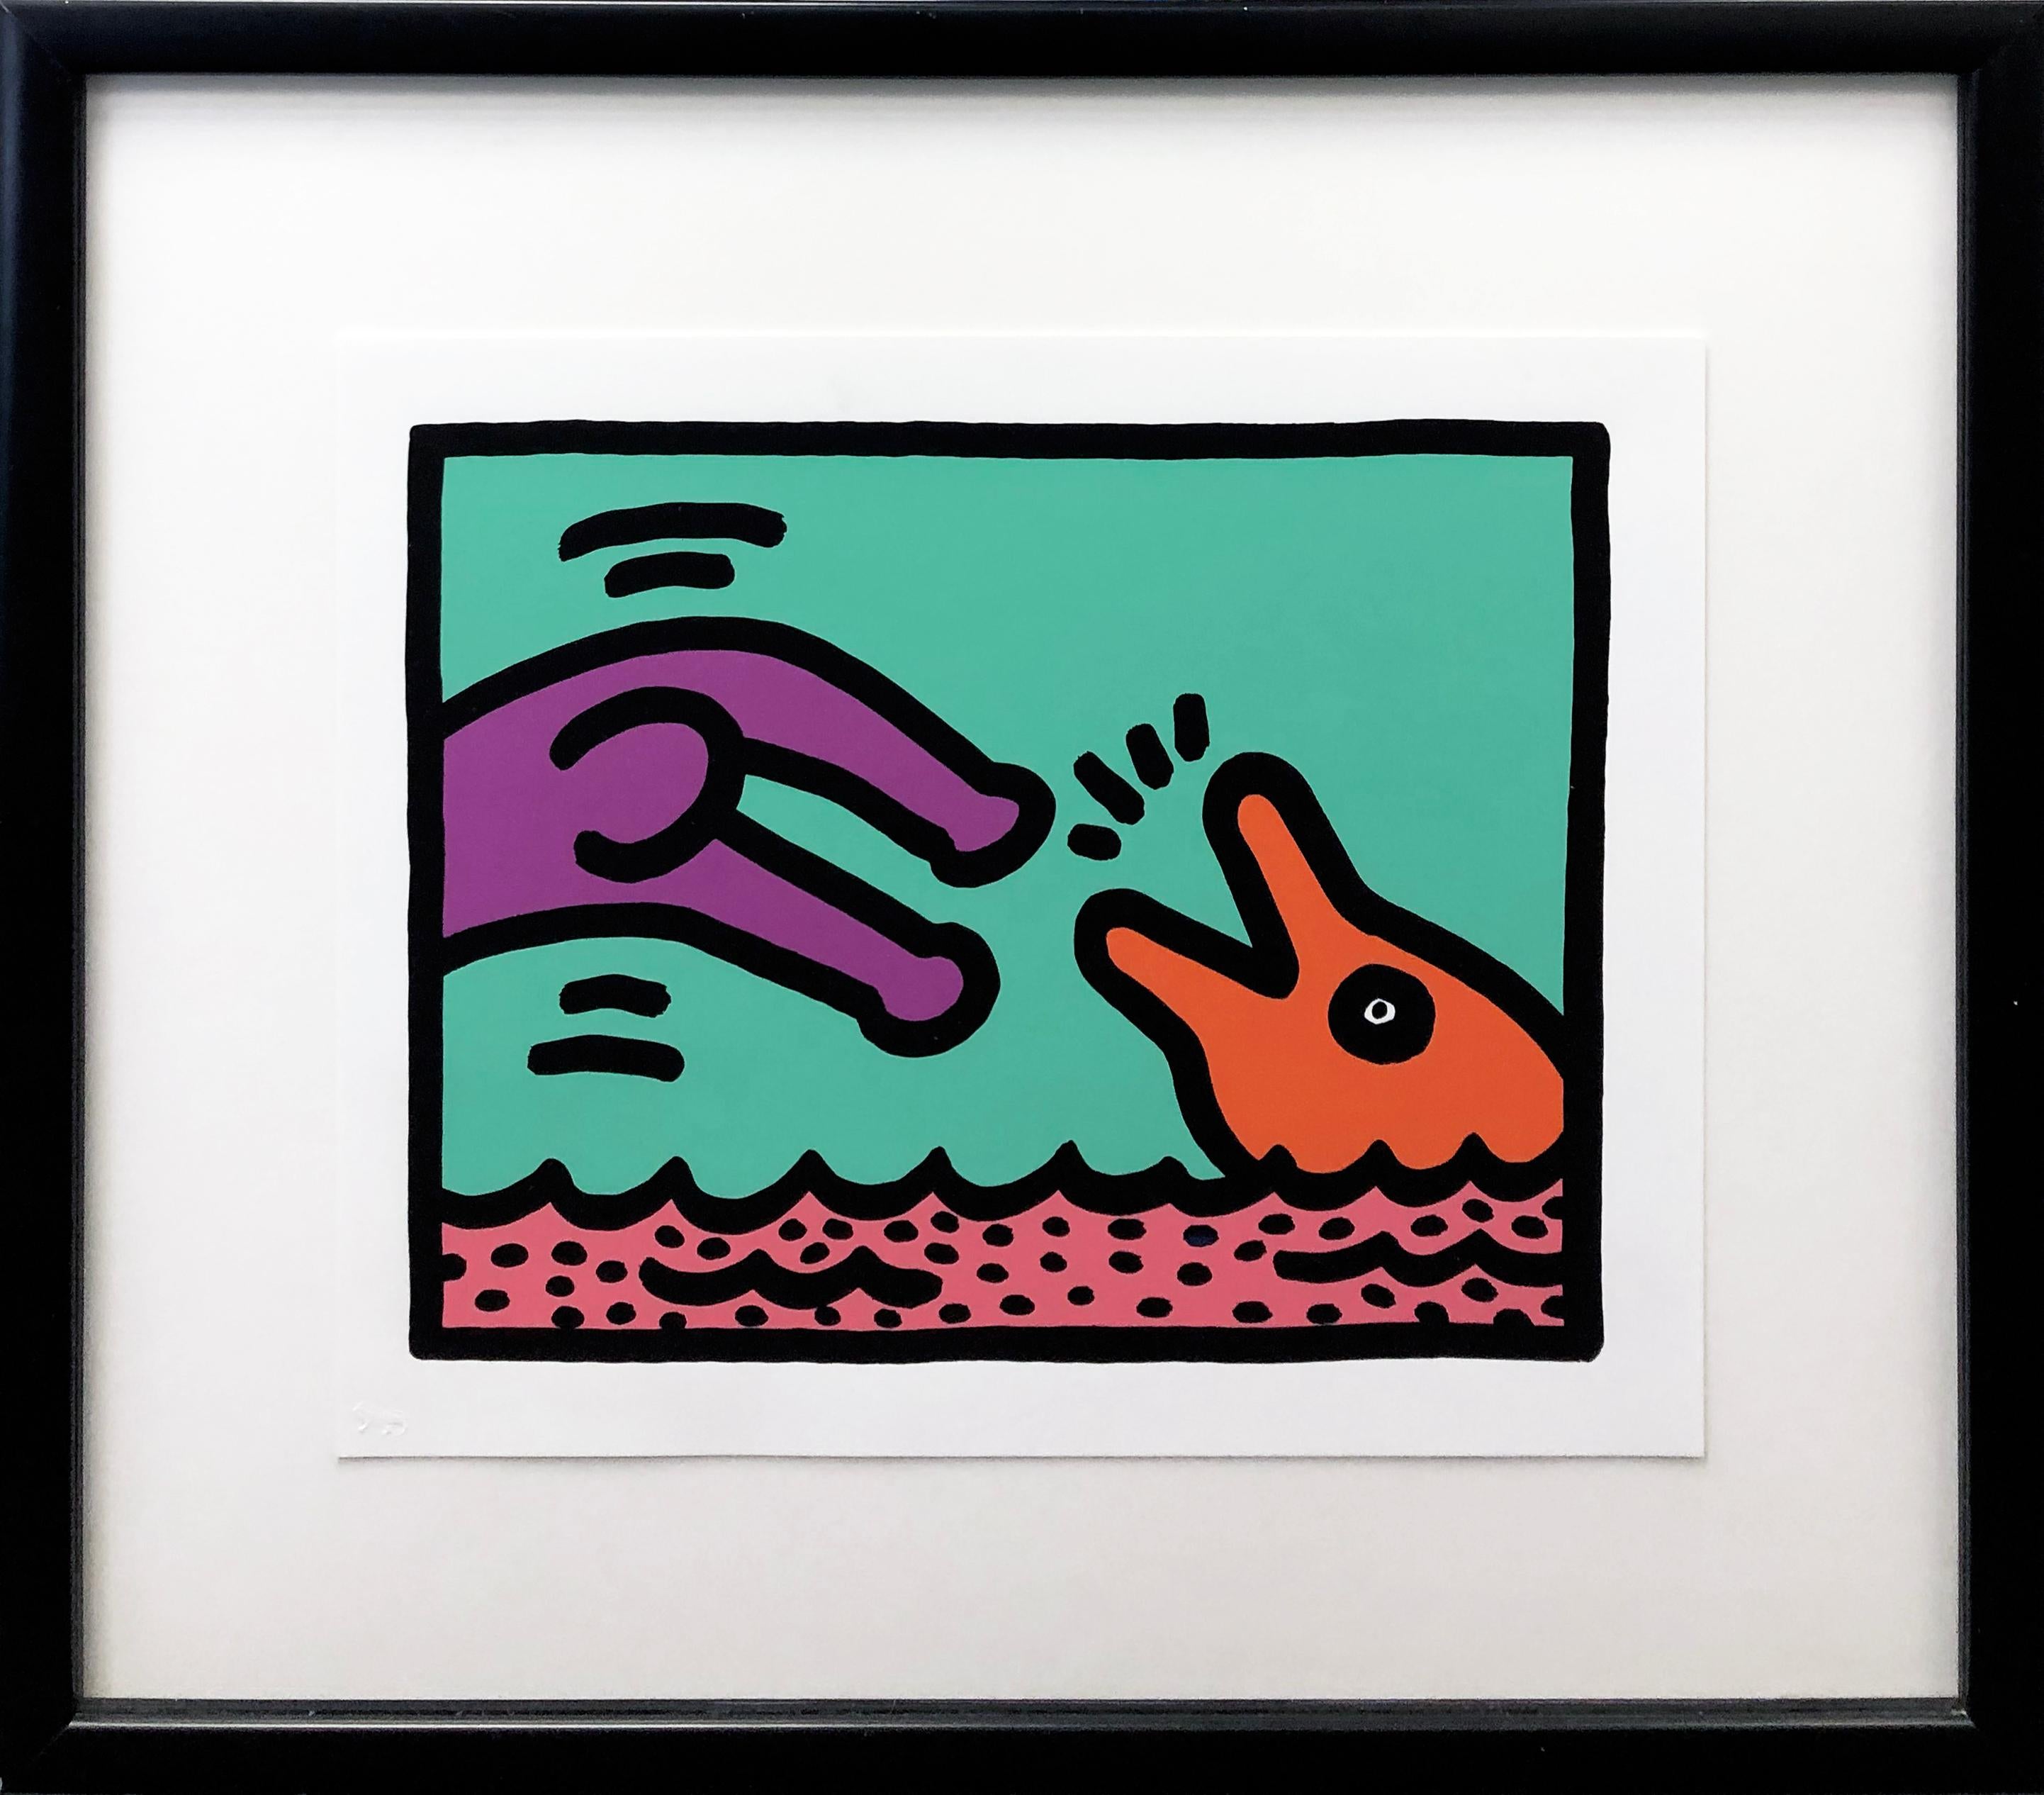 Keith Haring Portrait Print - Untitled from Pop Shop IV 